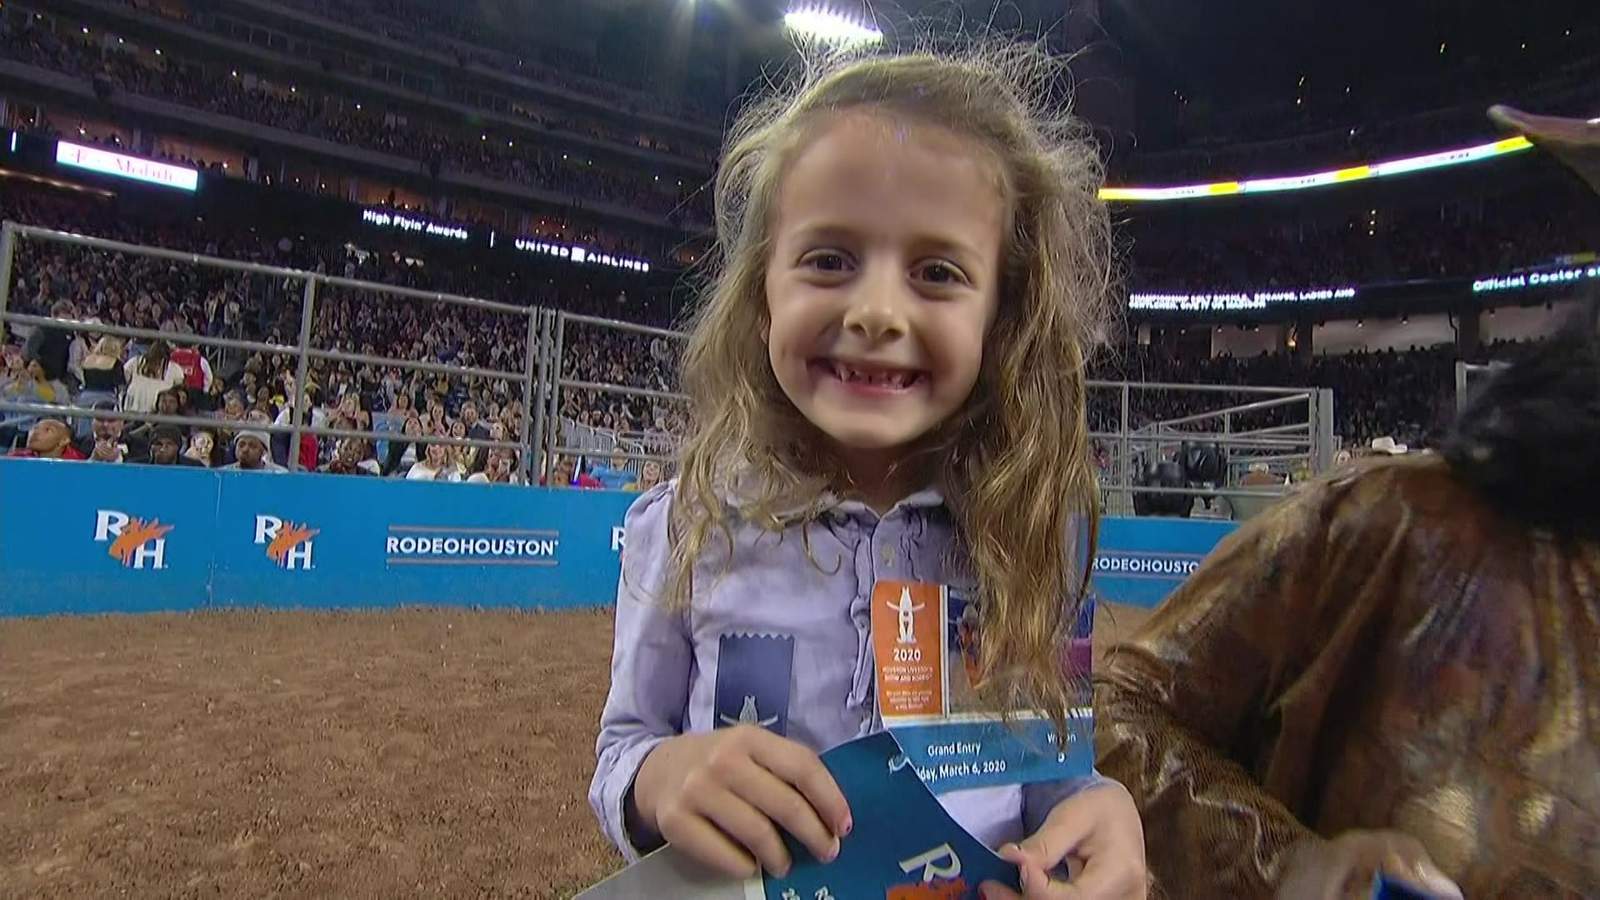 Rodeo’s night 4 mutton bustin’ champ says she wants to be an American Ninja Warrior when she grows up